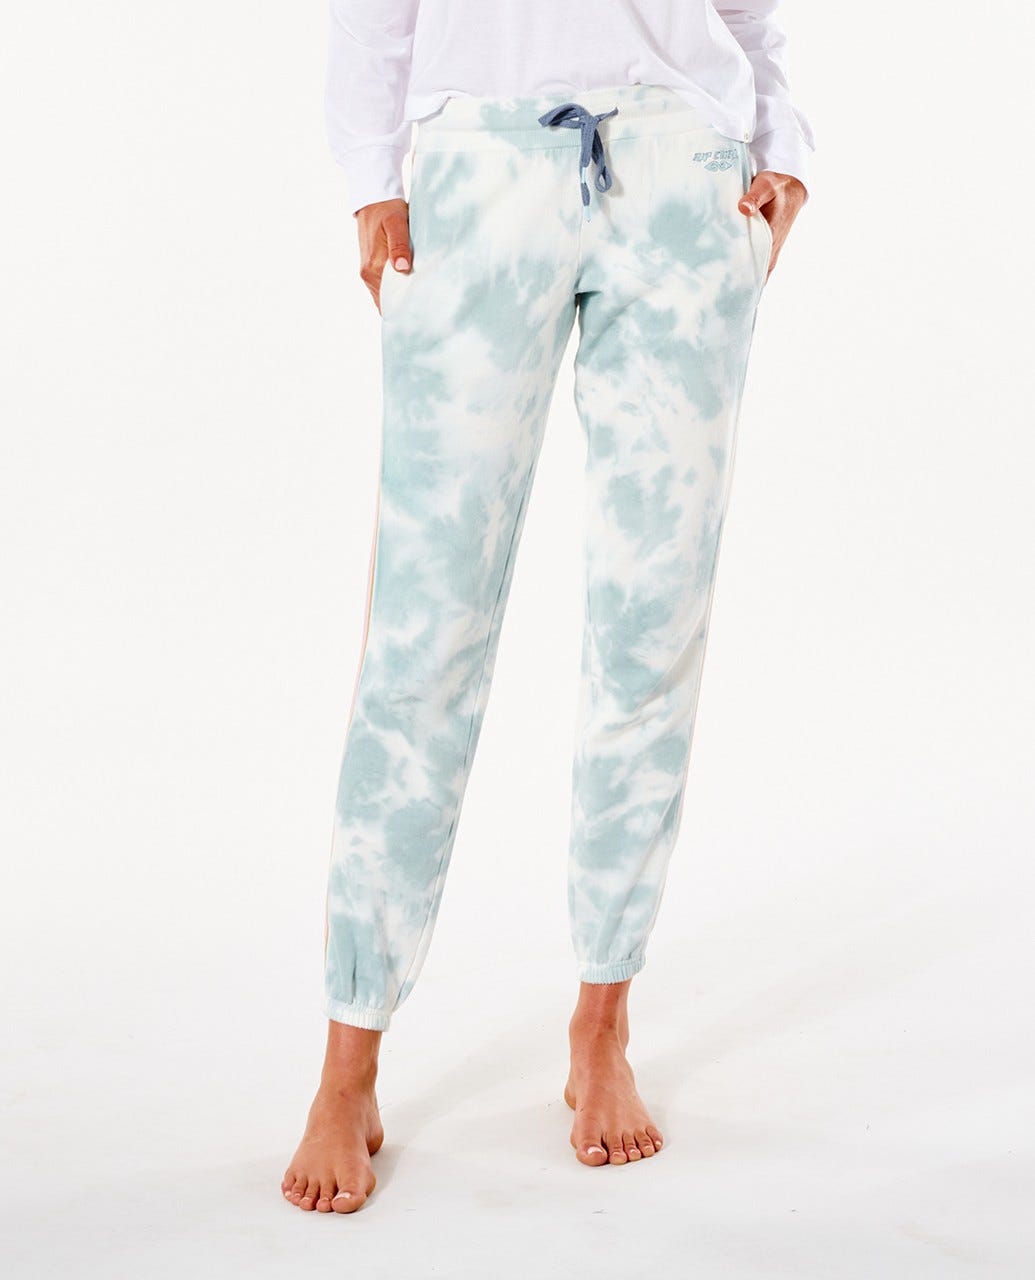 RIPCURL W TWIN FIN TRACK PANTS - Boutique Homies